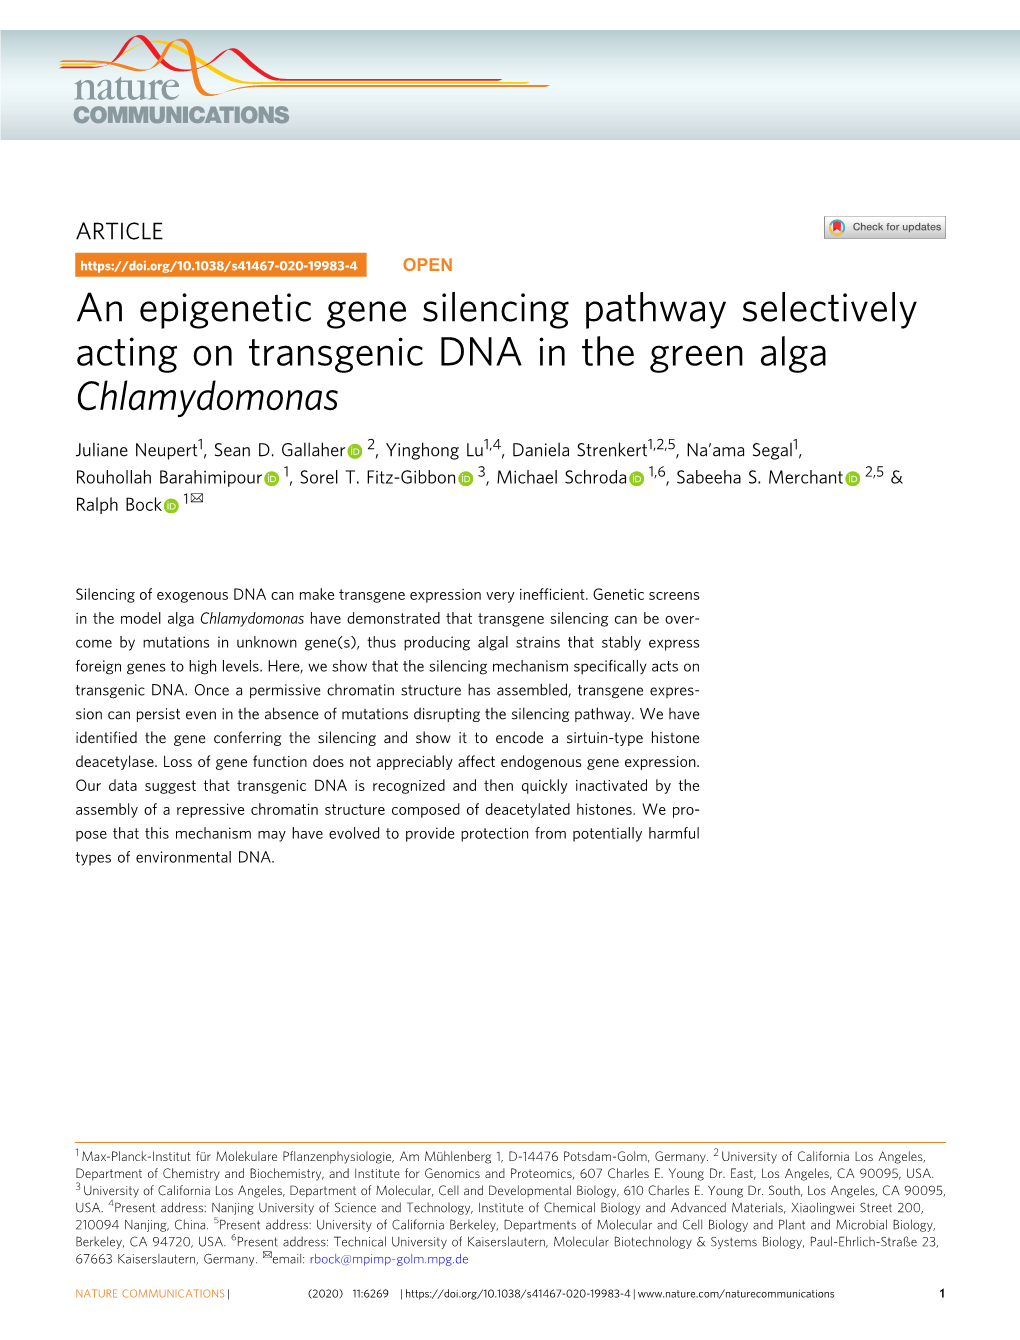 An Epigenetic Gene Silencing Pathway Selectively Acting on Transgenic DNA in the Green Alga Chlamydomonas